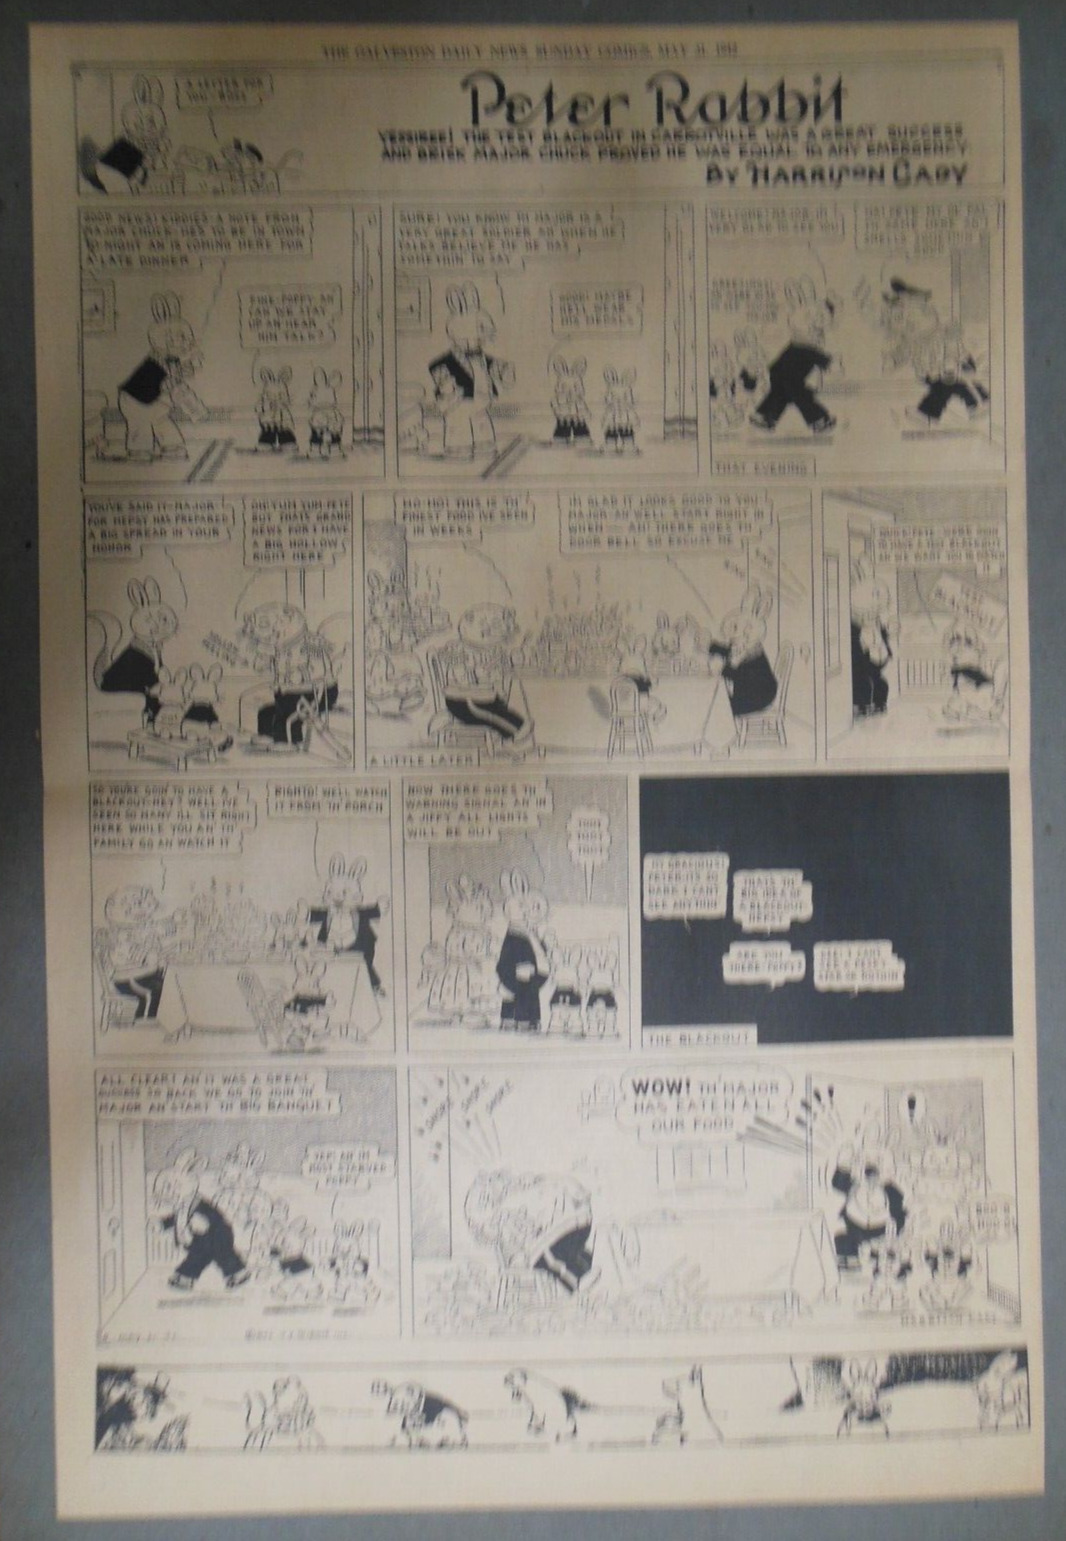 Peter Rabbit Sunday Page by Harrison Cady from 5/31/1942 Full Page Size